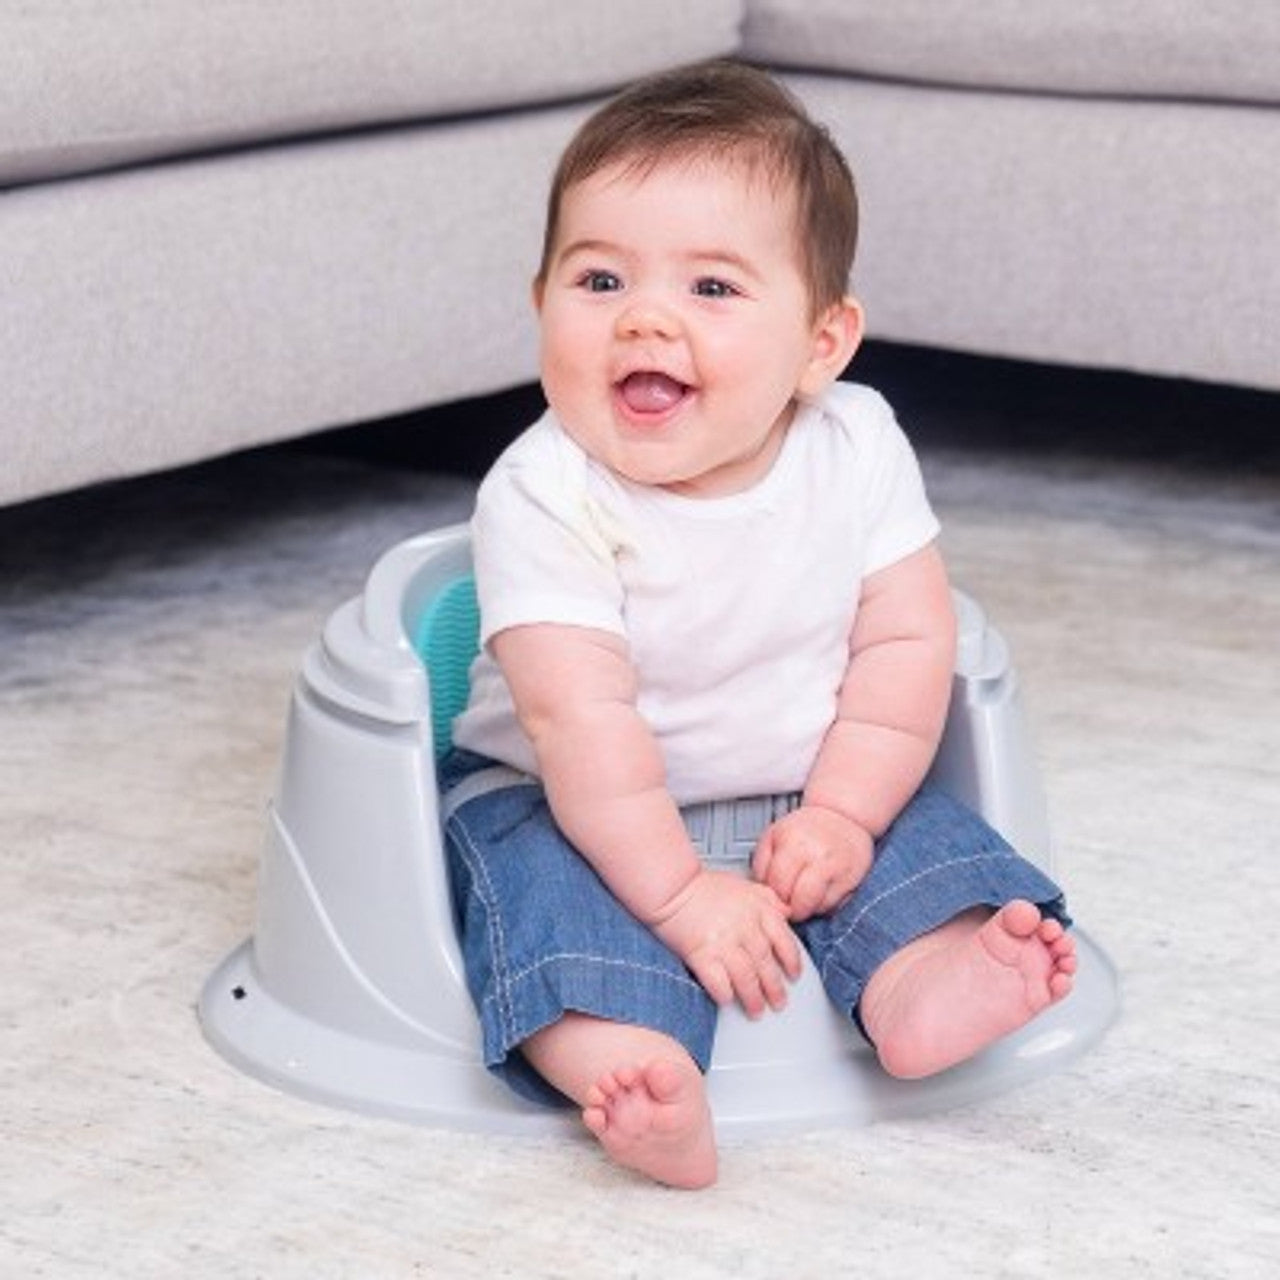 New - Summer Infant 3-Stage Deluxe SuperSeat Positioner, Booster, and Activity Center for Baby